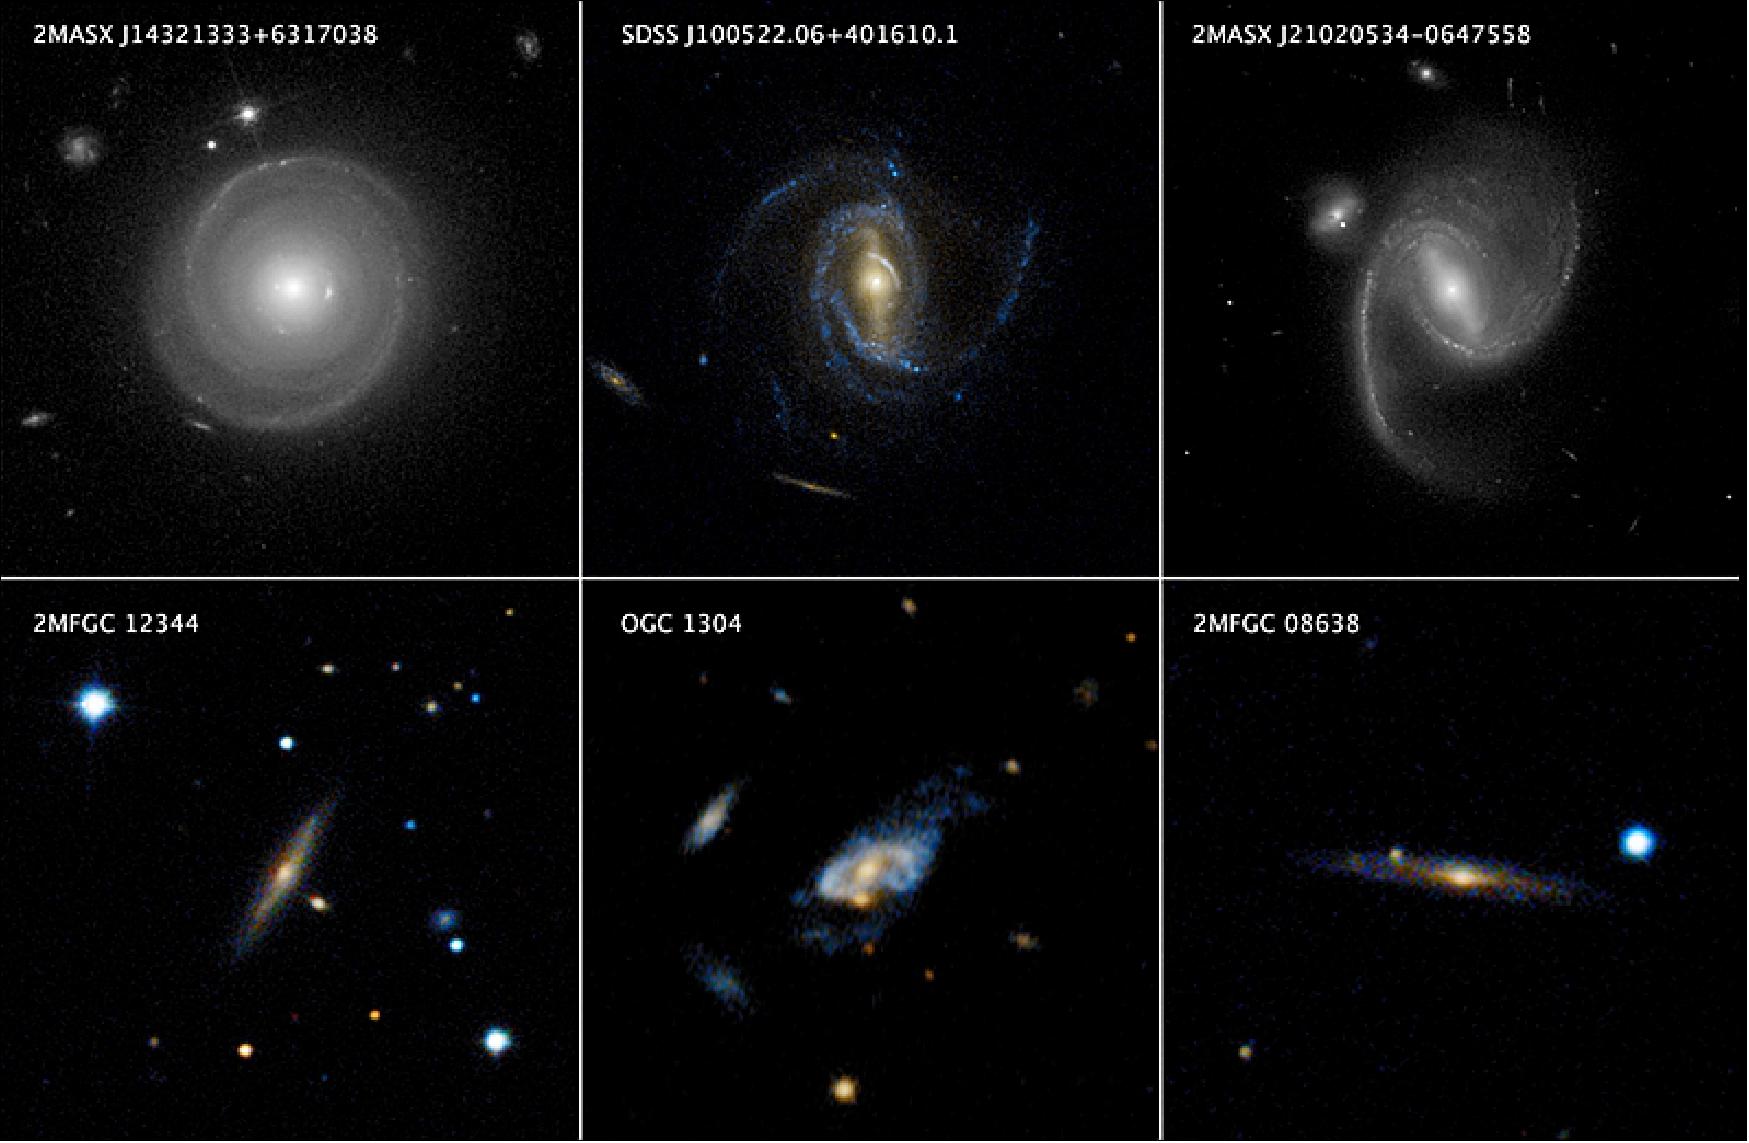 Figure 16: The top row of this mosaic features Hubble images of three spiral galaxies, each of which with a mass several times as much as the Milky Way. The bottom row shows three even more massive spiral galaxies that qualify as “super spirals,” which were observed by the ground-based Sloan Digital Sky Survey. Super spirals typically have 10 to 20 times the mass of the Milky Way. The galaxy at lower right, 2MFGC 08638, is the most massive super spiral known to date, with a dark matter halo with a mass of at least 40 trillion Suns. — Astronomers have measured the rotation rates in the outer reaches of these spirals to determine how much dark matter they contain. They found that the super spirals tend to rotate much faster than expected for their stellar masses, making them outliers. Their speed may be due to the influence of a surrounding dark matter halo, the largest of which contains the mass of at least 40 trillion suns [image credit: NASA, ESA, P. Ogle and J. DePasquale (STScI ). Bottom row: SDSS, P. Ogle and J. DePasquale (STScI)]